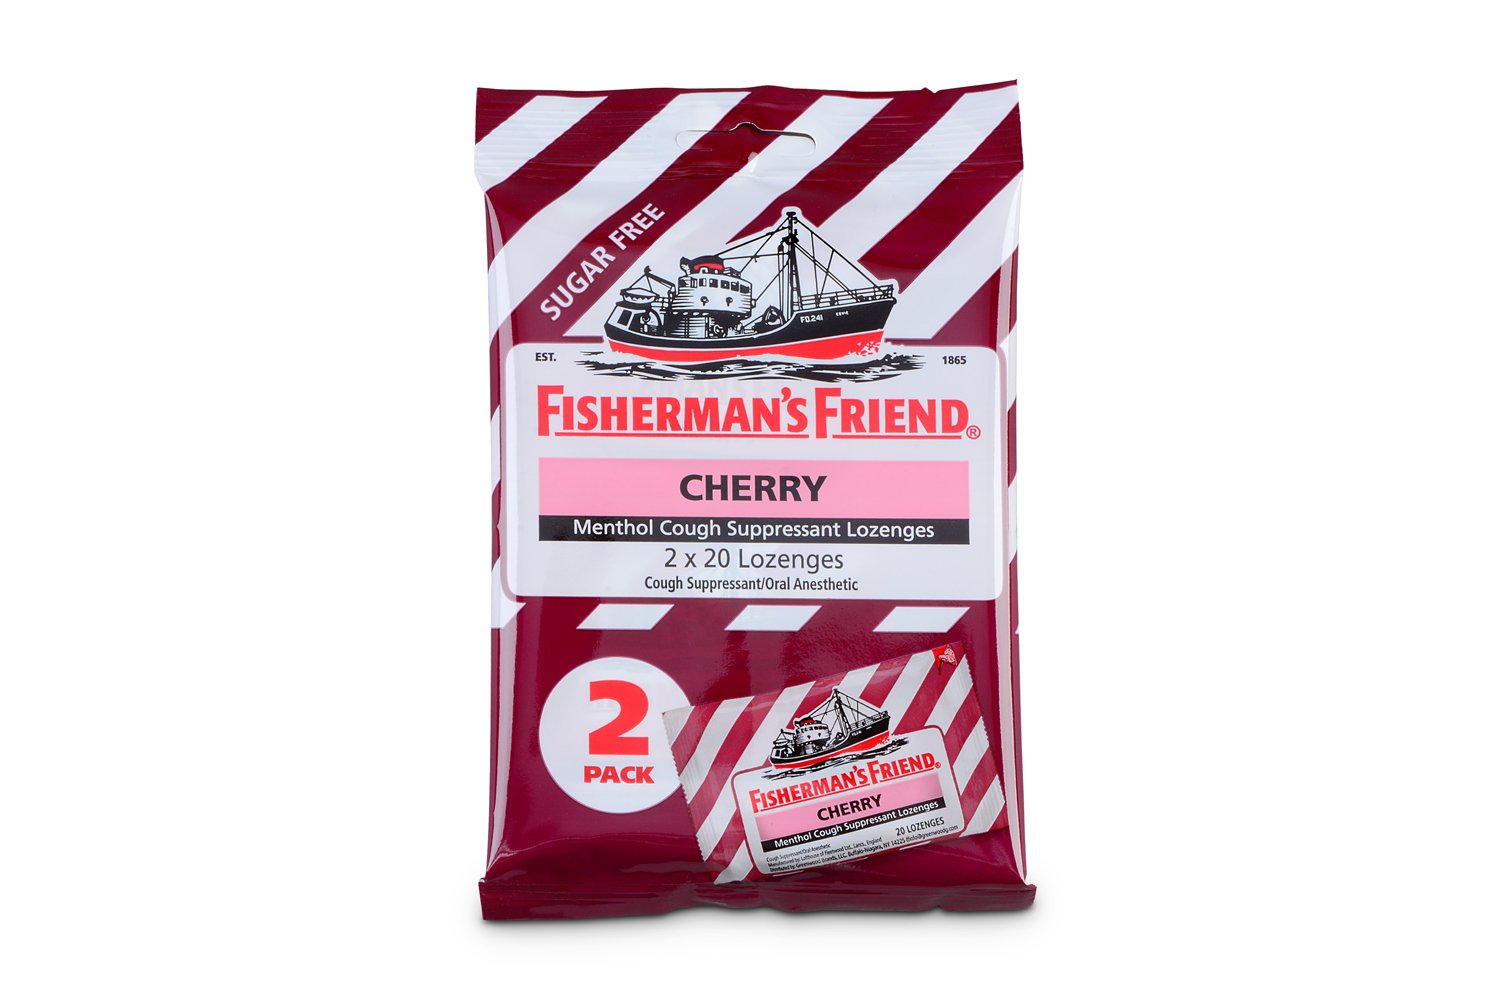 Cough Drops by Fisherman's Friend, Cough Suppressant and Sore Throat Lozenges, Cherry Sugar Free Menthol Flavor, 40 Count